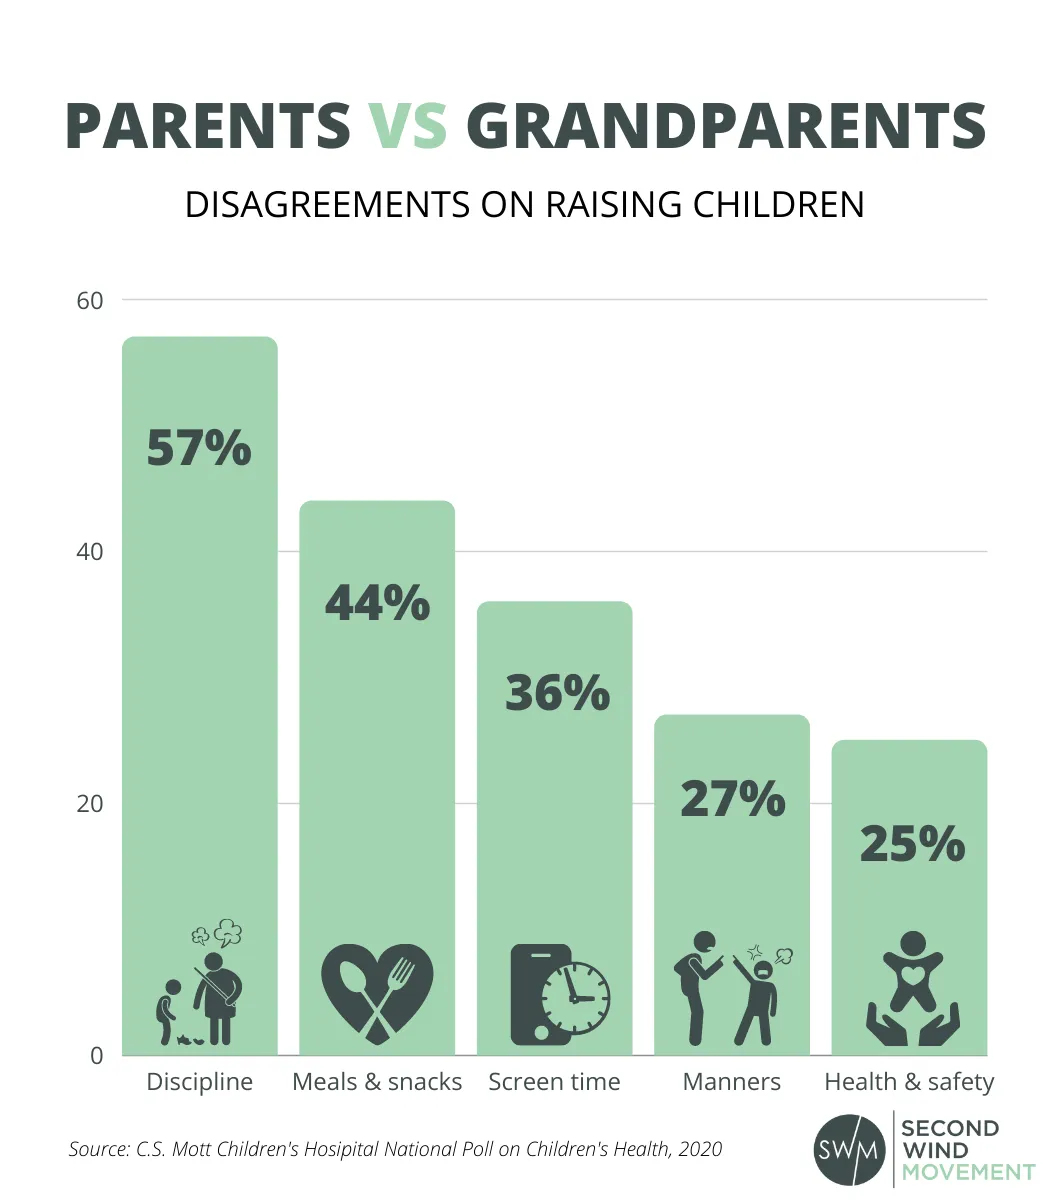 parents vs grandparents - the main disagreements on raising children: discipline, meals and snacks, screen time, manners, health & safety